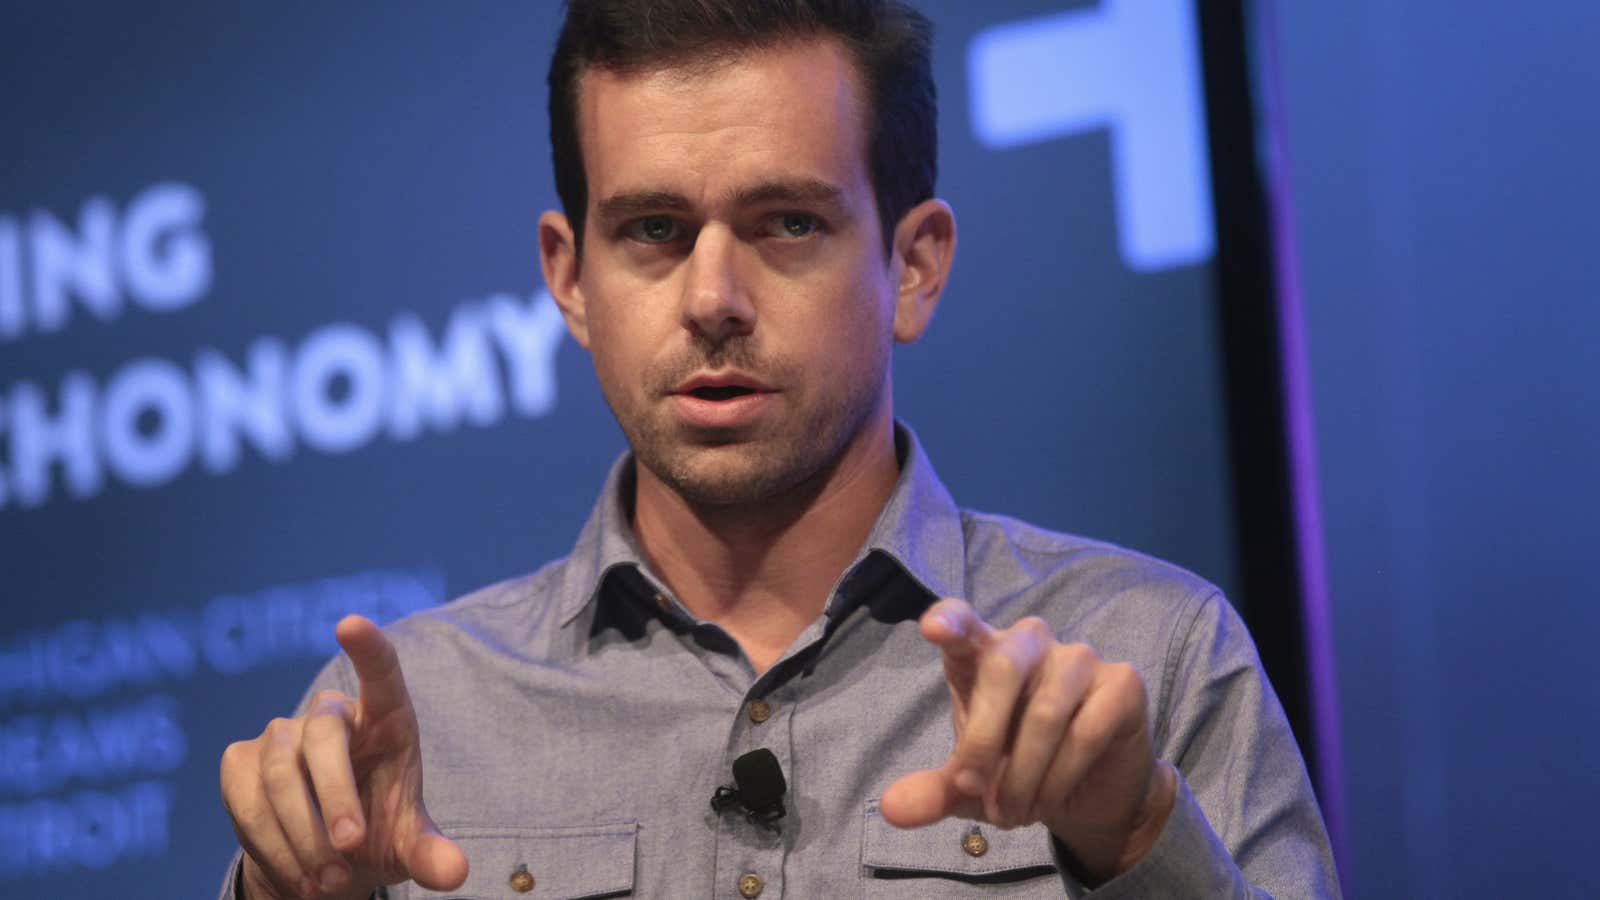 Jack Dorsey is taking is second company, Square, public.